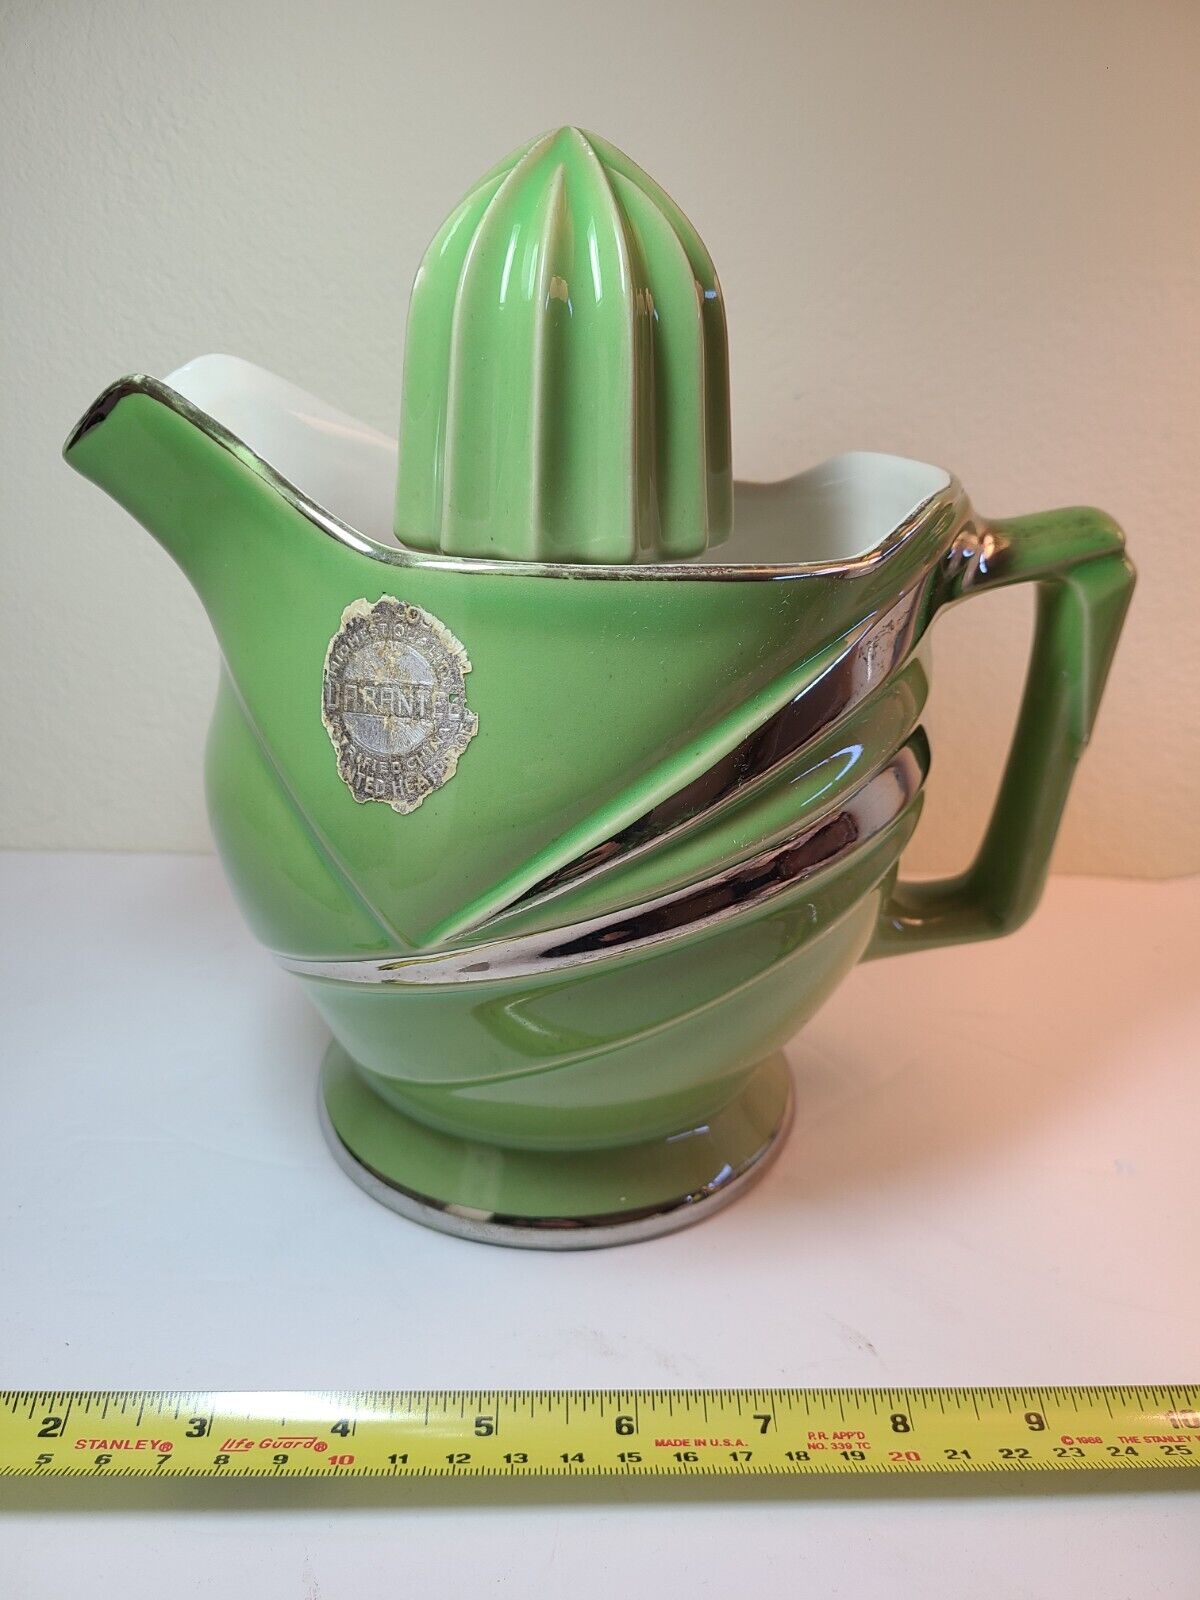 Coors Deco 1930s Porcelain Modernistic Ade-O-Matic Green/Silver Reamer / Juicer